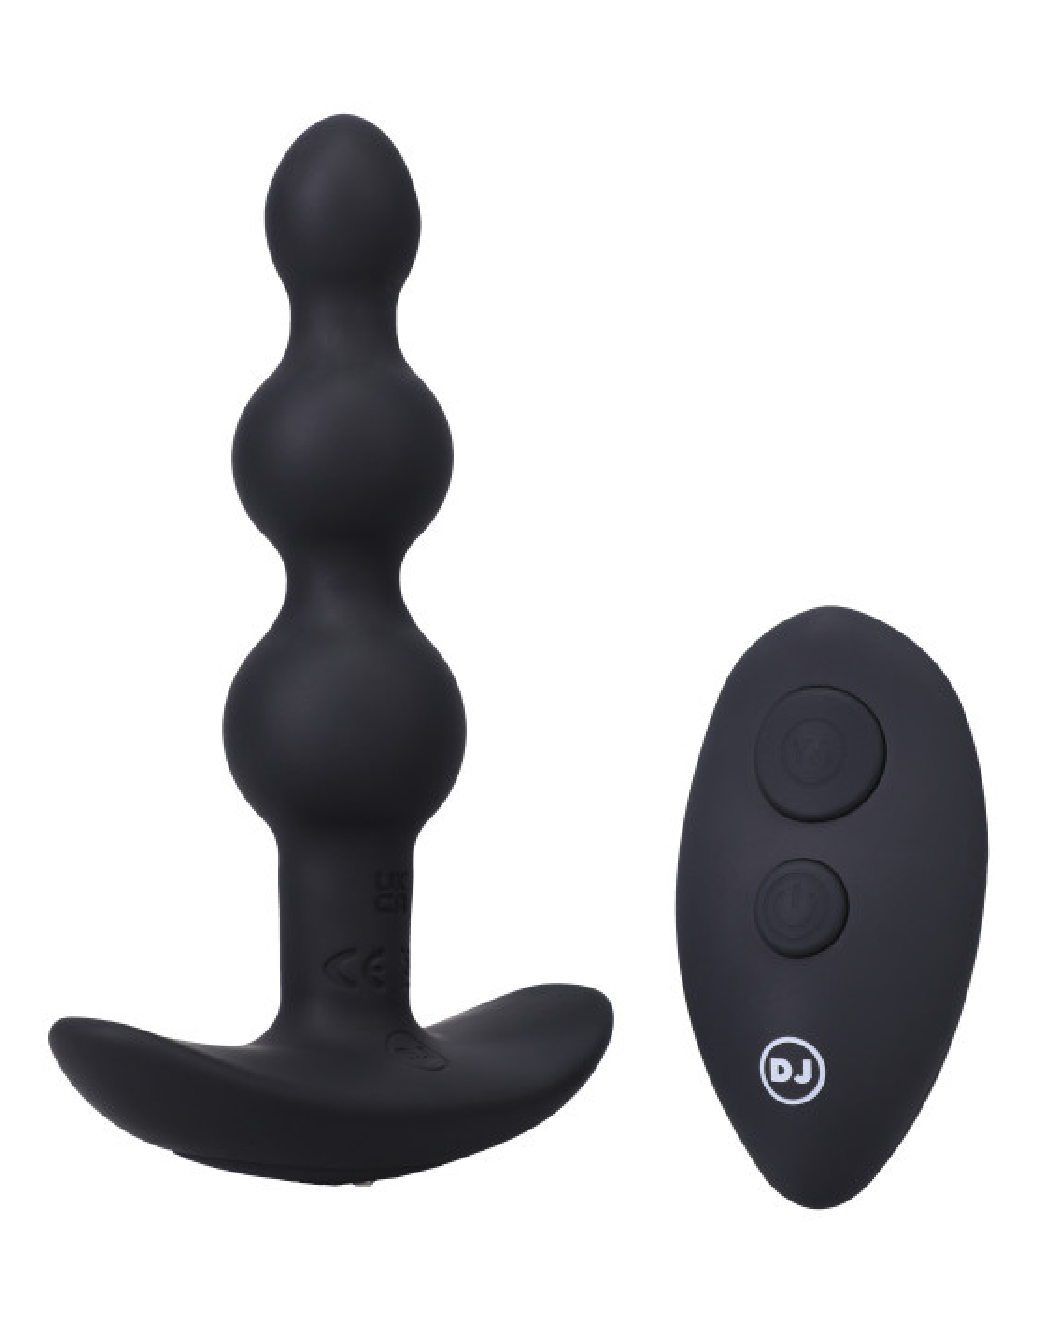 A-Play Beaded Vibrating Anal Beads with Remote - Black